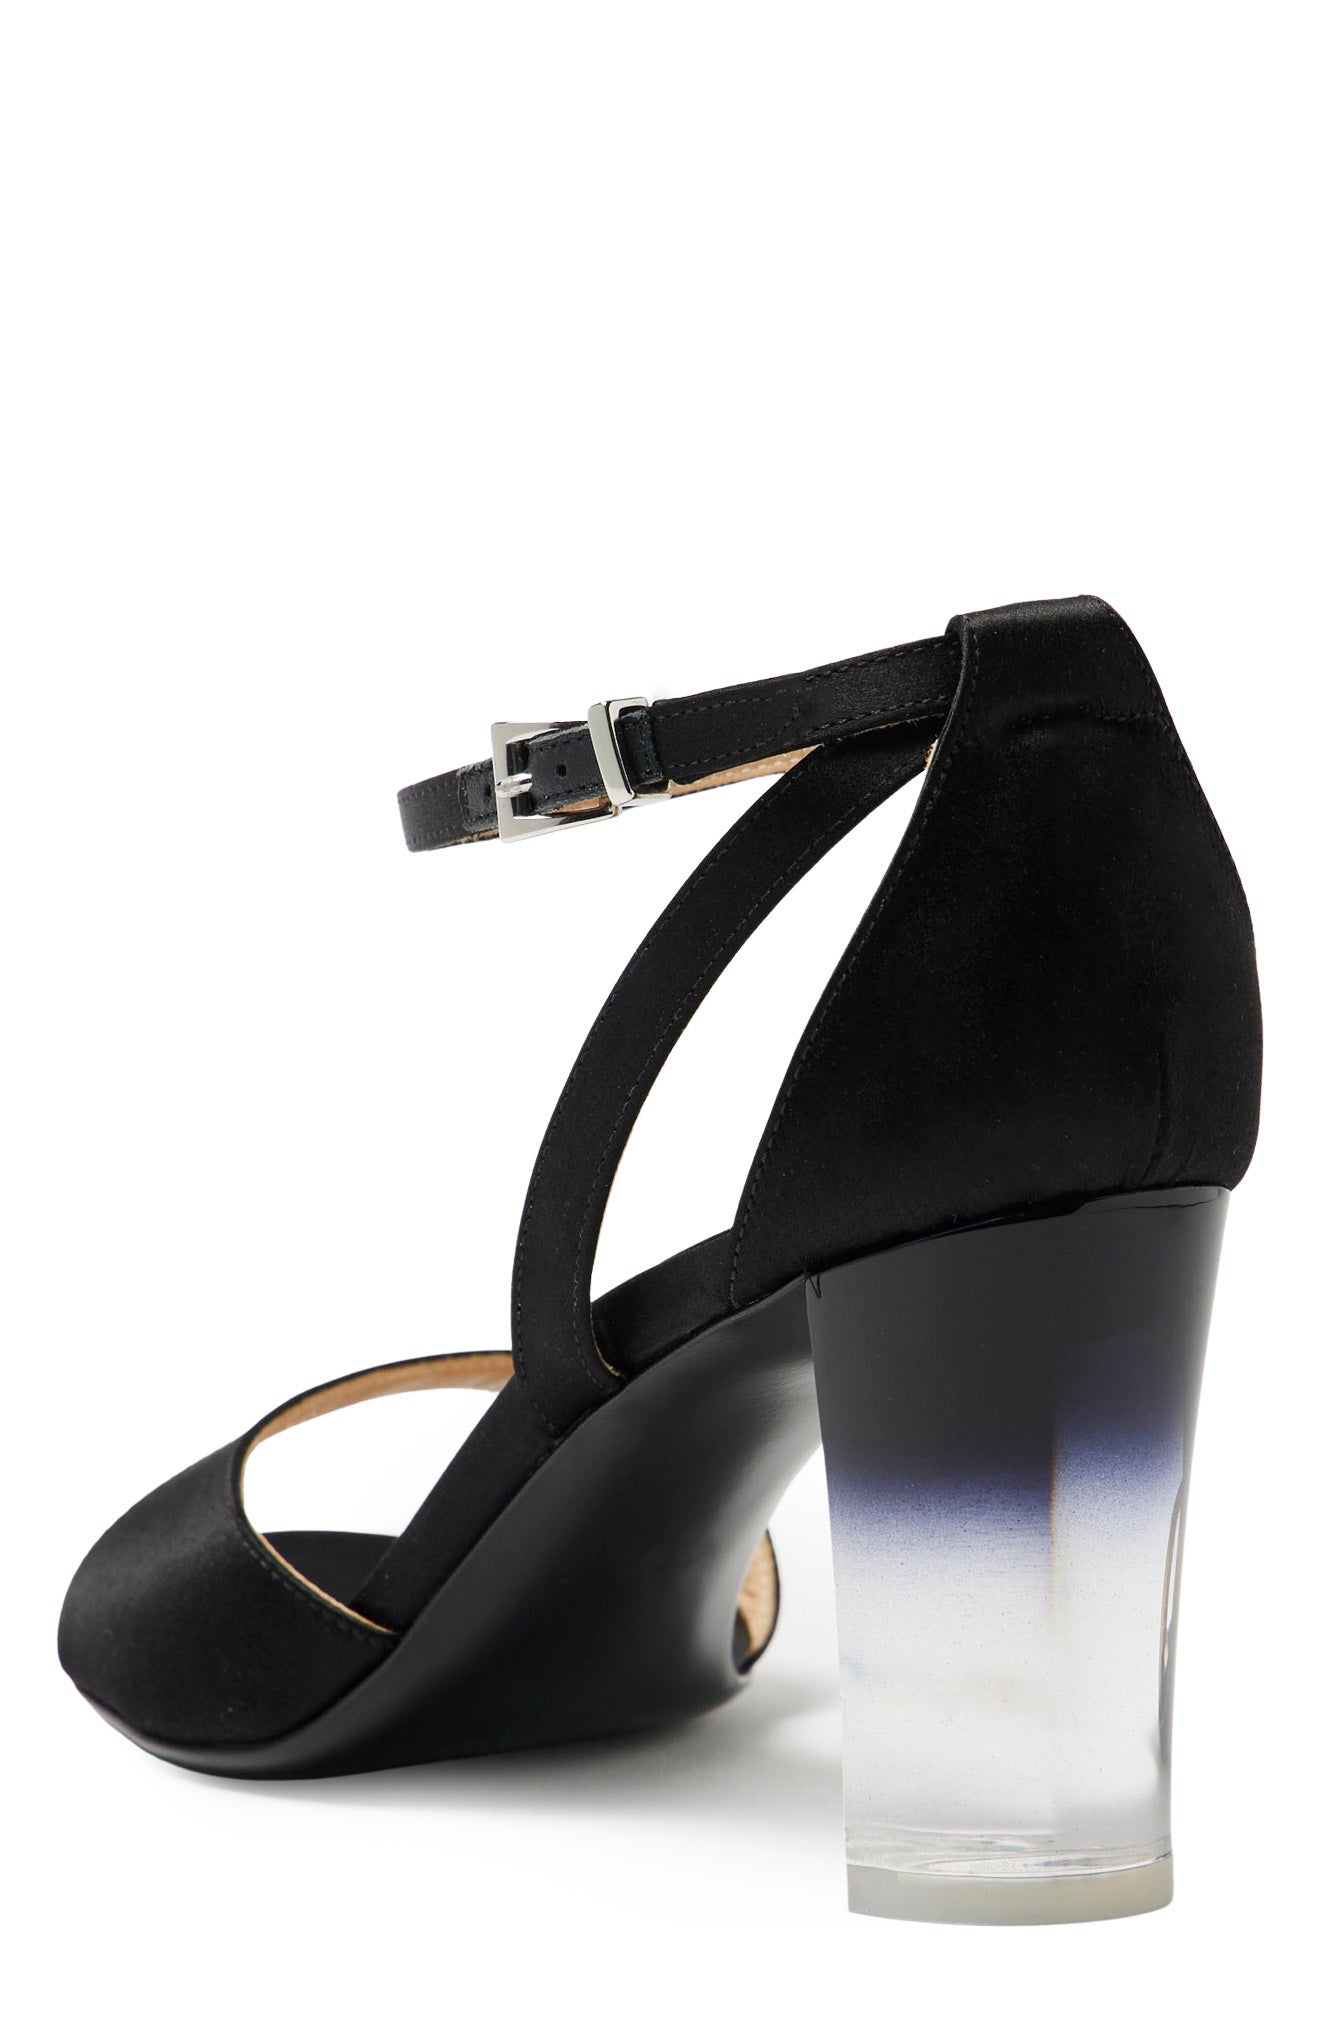 Black satin sandal with adjustable ankle strap and 80mm ombre lucite heel.